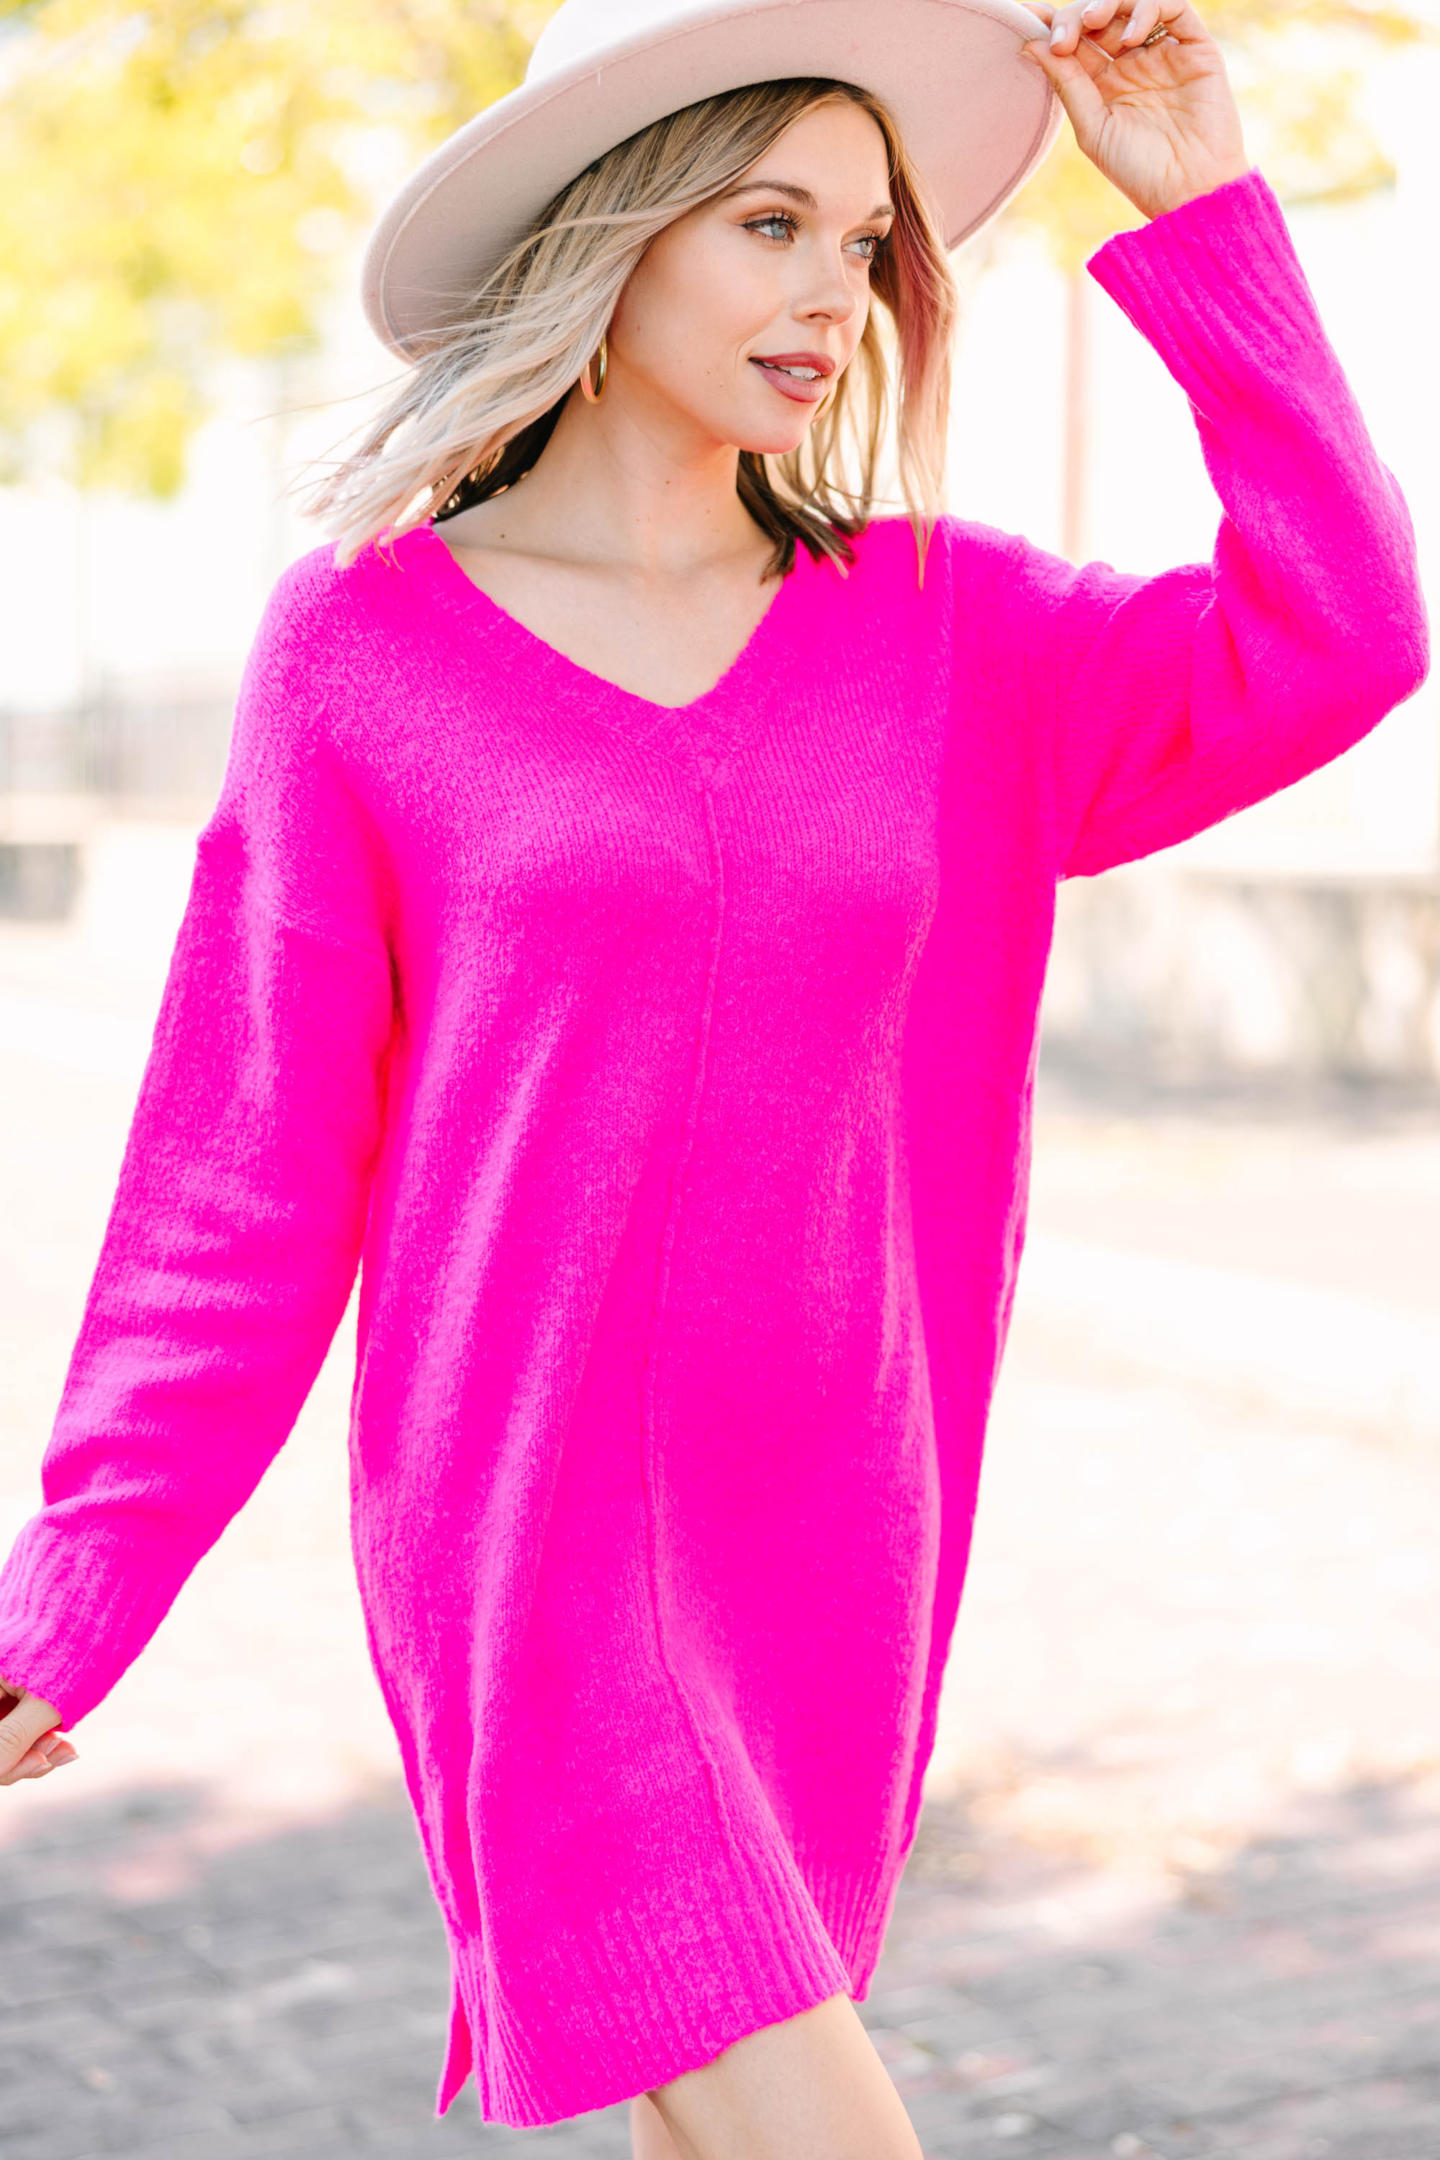 https://shopthemint.com/products/ready-for-the-day-hot-pink-sweater-dress?variant=39707171684410